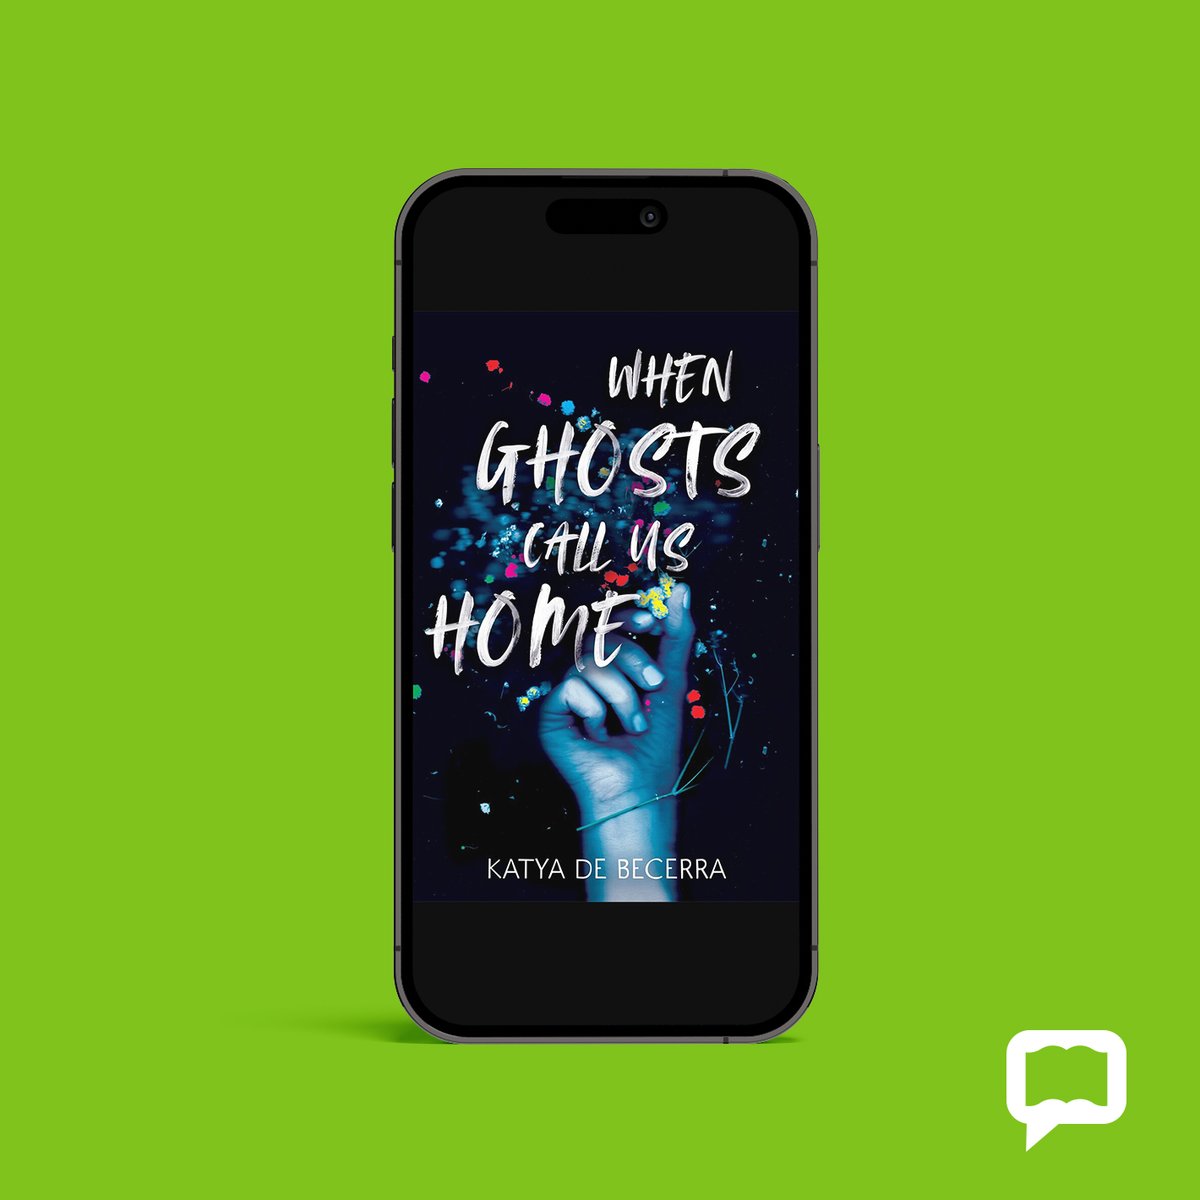 @KatyaDeBecerra weaves a spine-tingling tale where past horrors come back to haunt a young woman in a California house filled with secrets. Read on BorrowBox now!